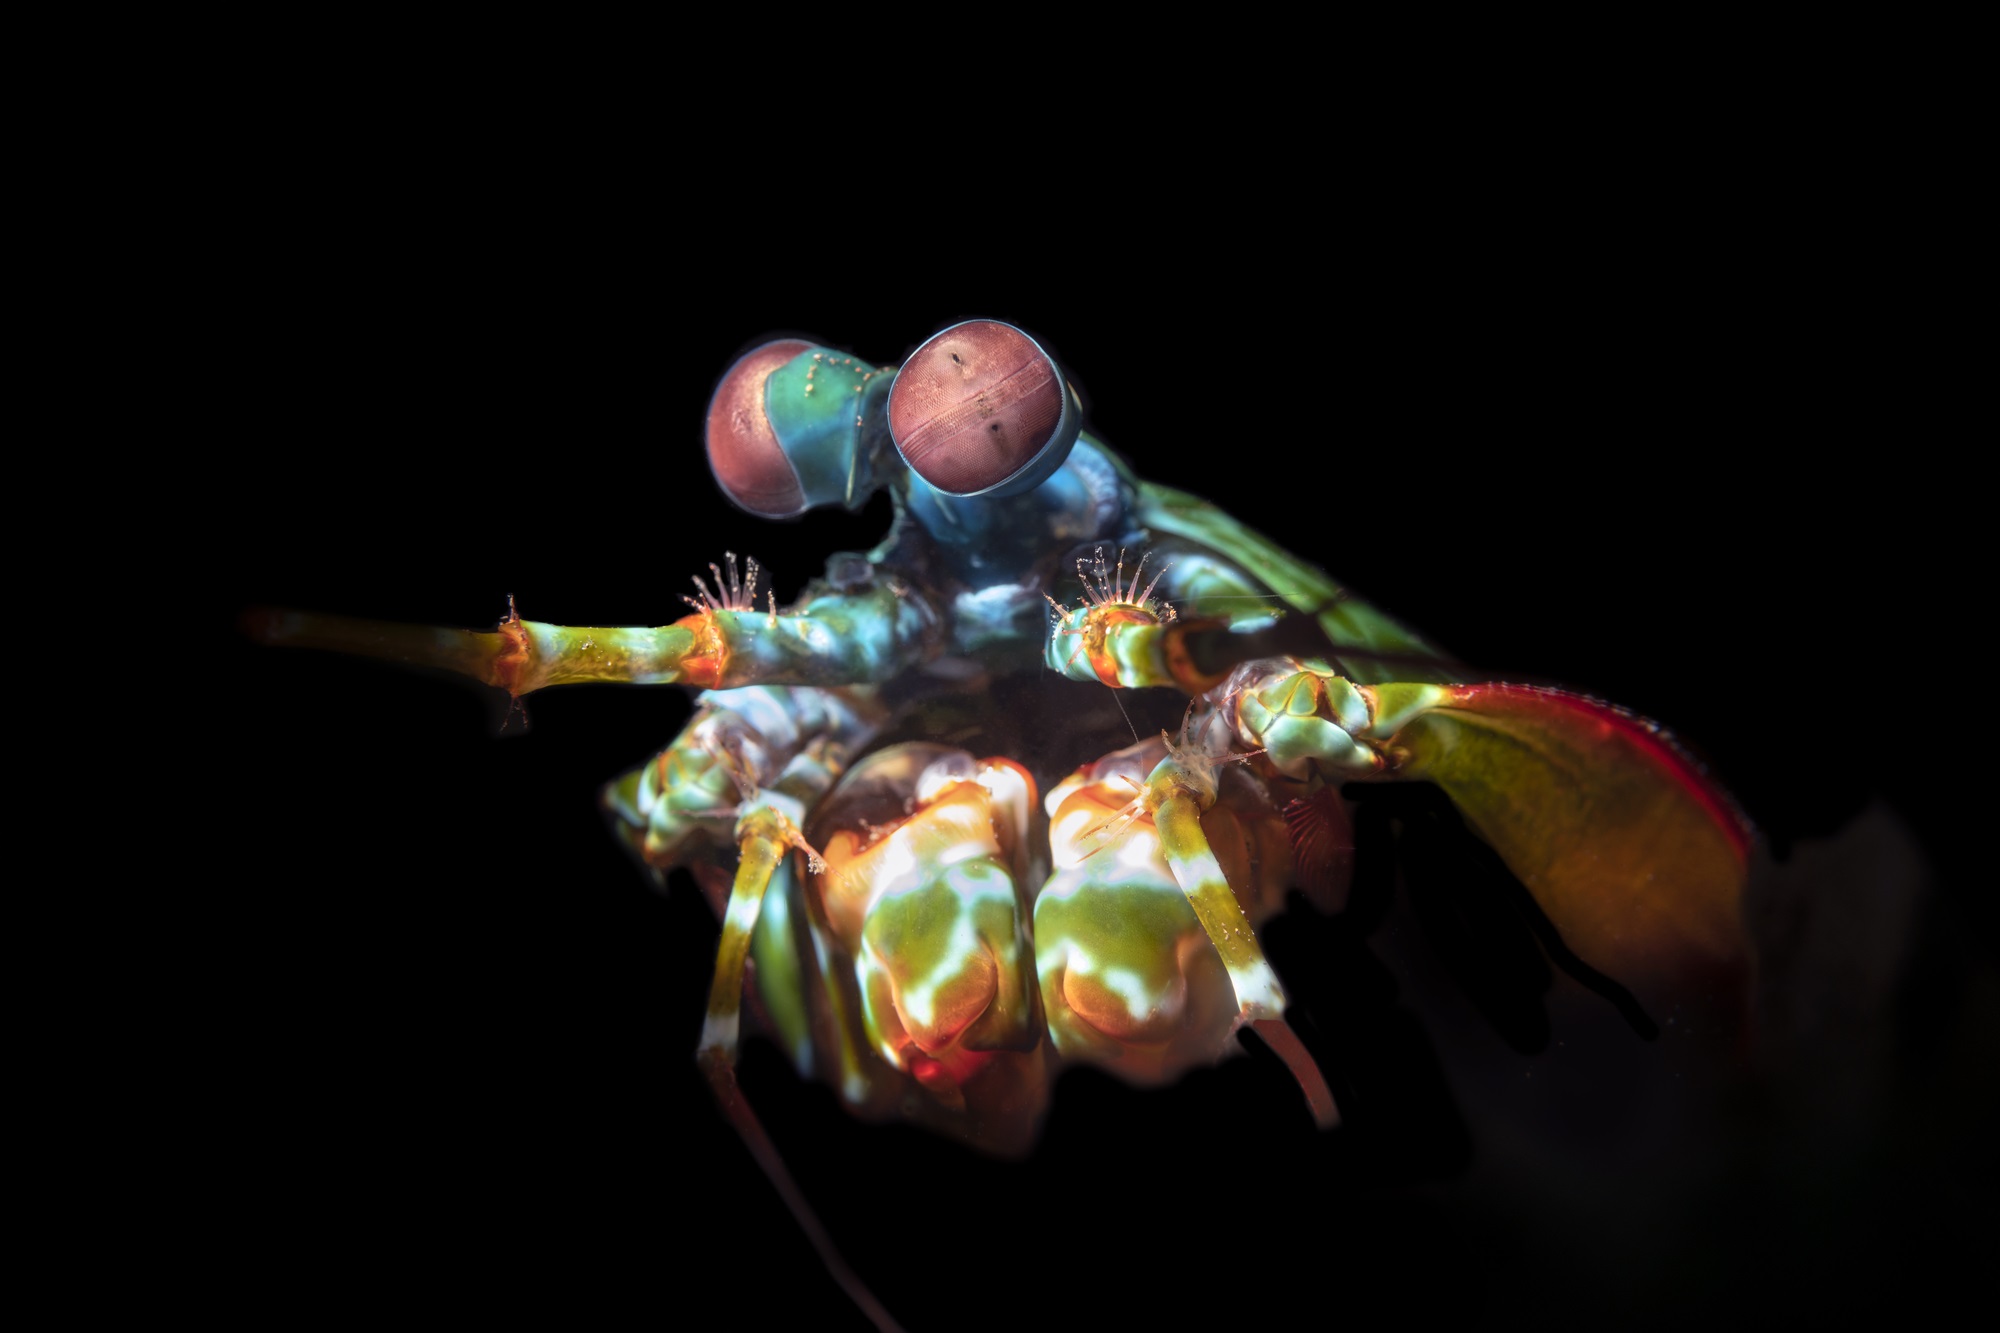 Colorful mantis shrimp with giant eyes that have color vision on black background